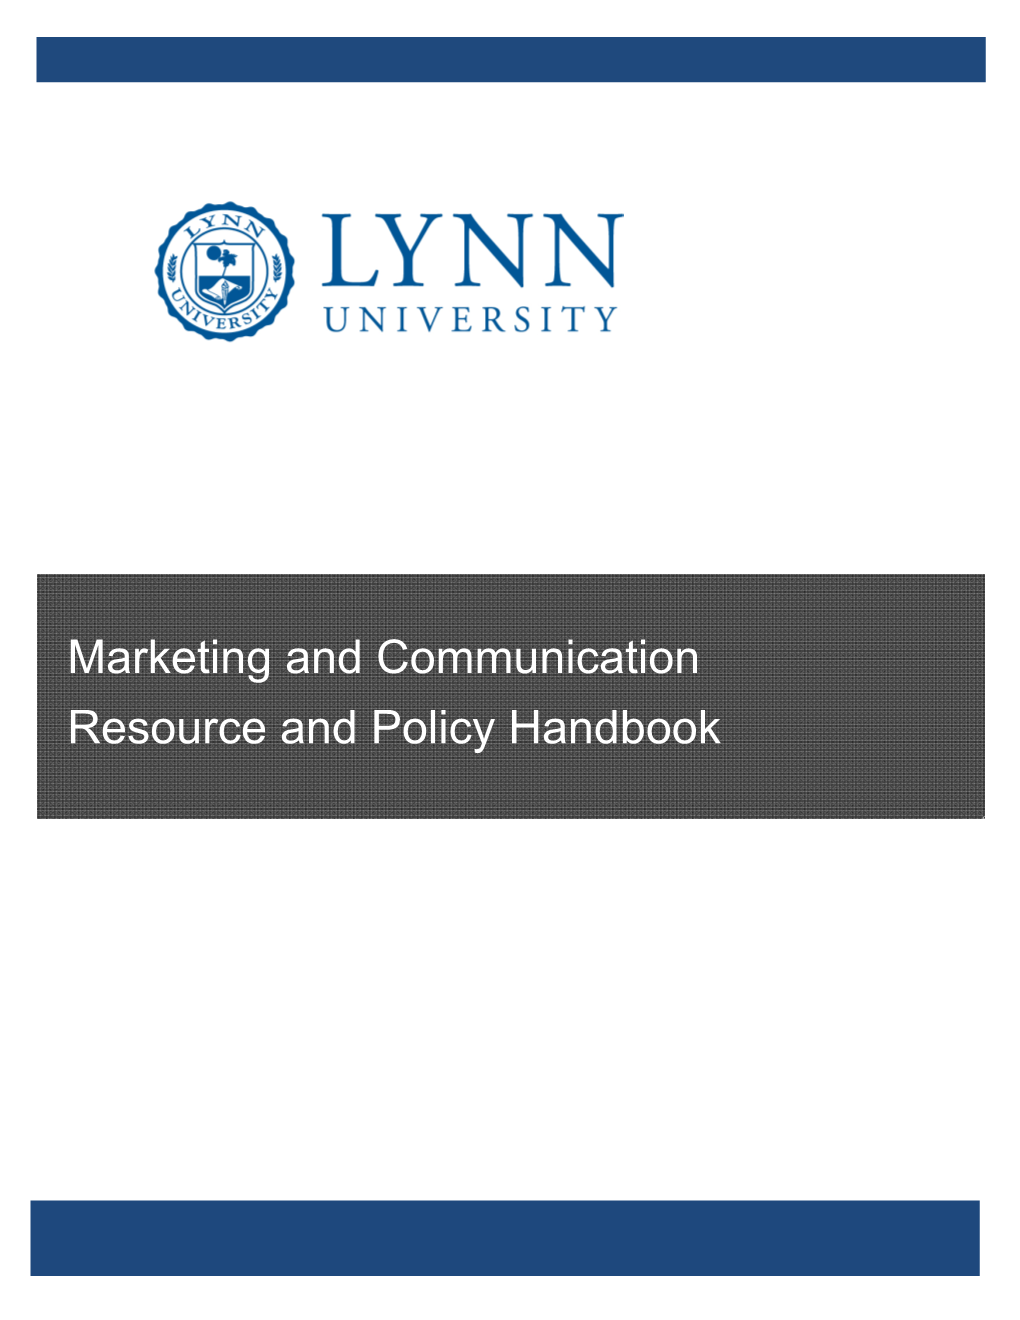 Marketing and Communication Resource and Policy Handbook